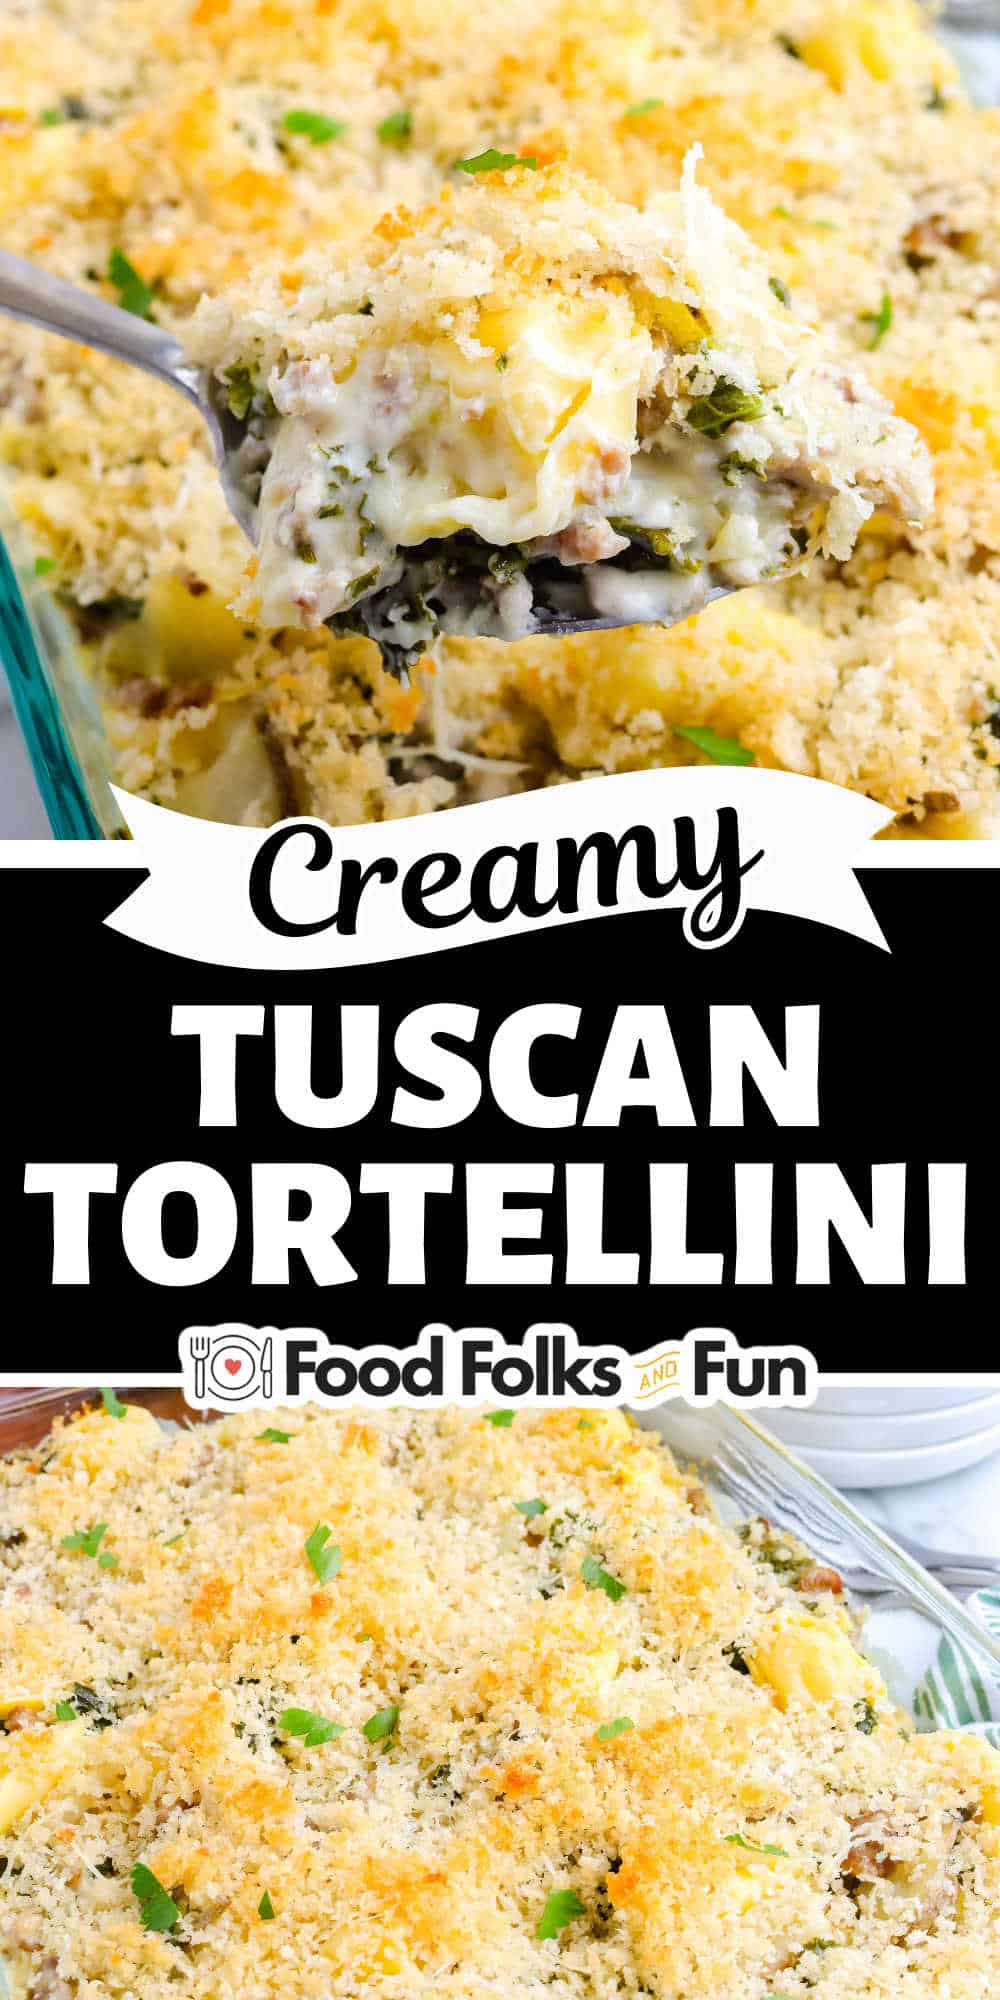 This baked tortellini combines Italian sausage, creamy sauce, tortellini, and kale for a quick and easy weeknight meal. via @foodfolksandfun